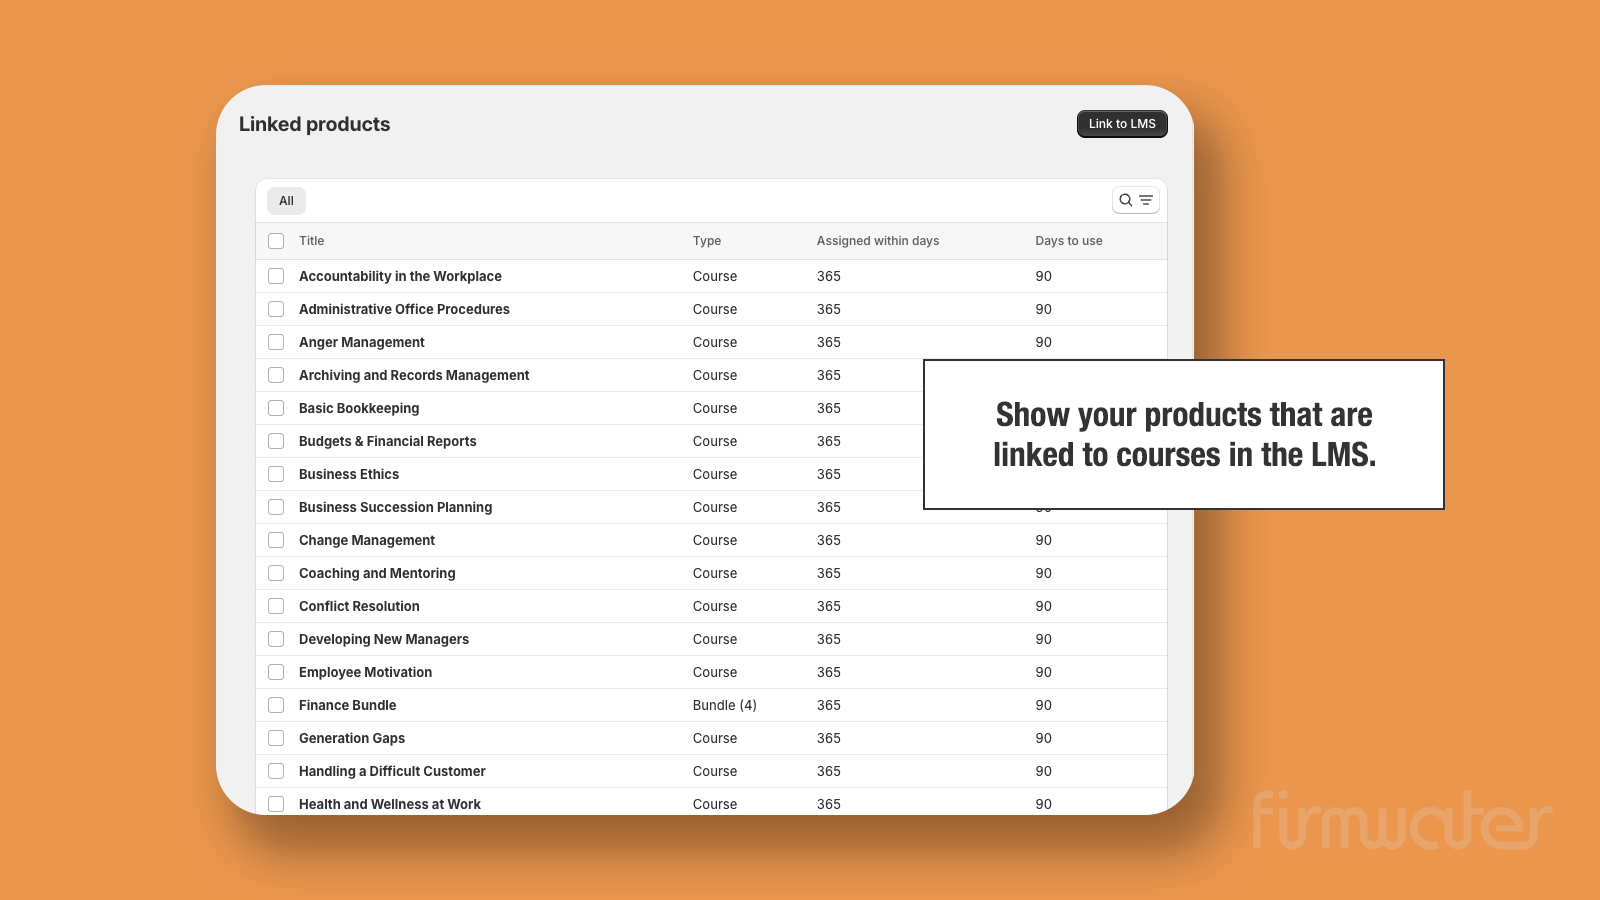 Show your products that are linked to courses in the LMS.